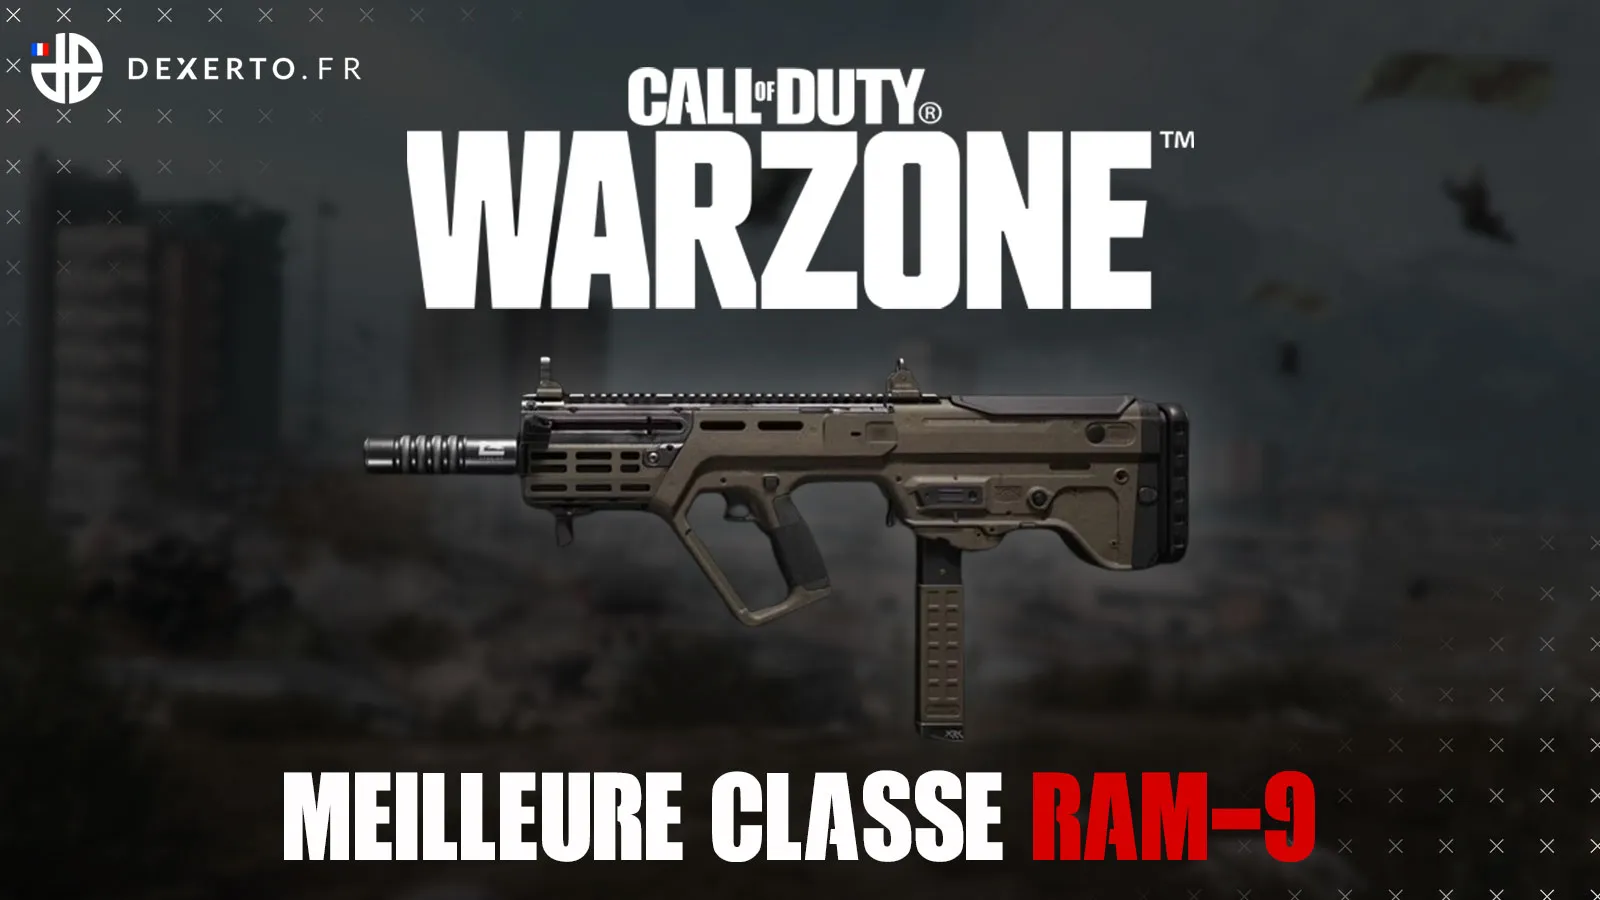 The best RAM-9 class in Warzone: accessories, perks, equipment